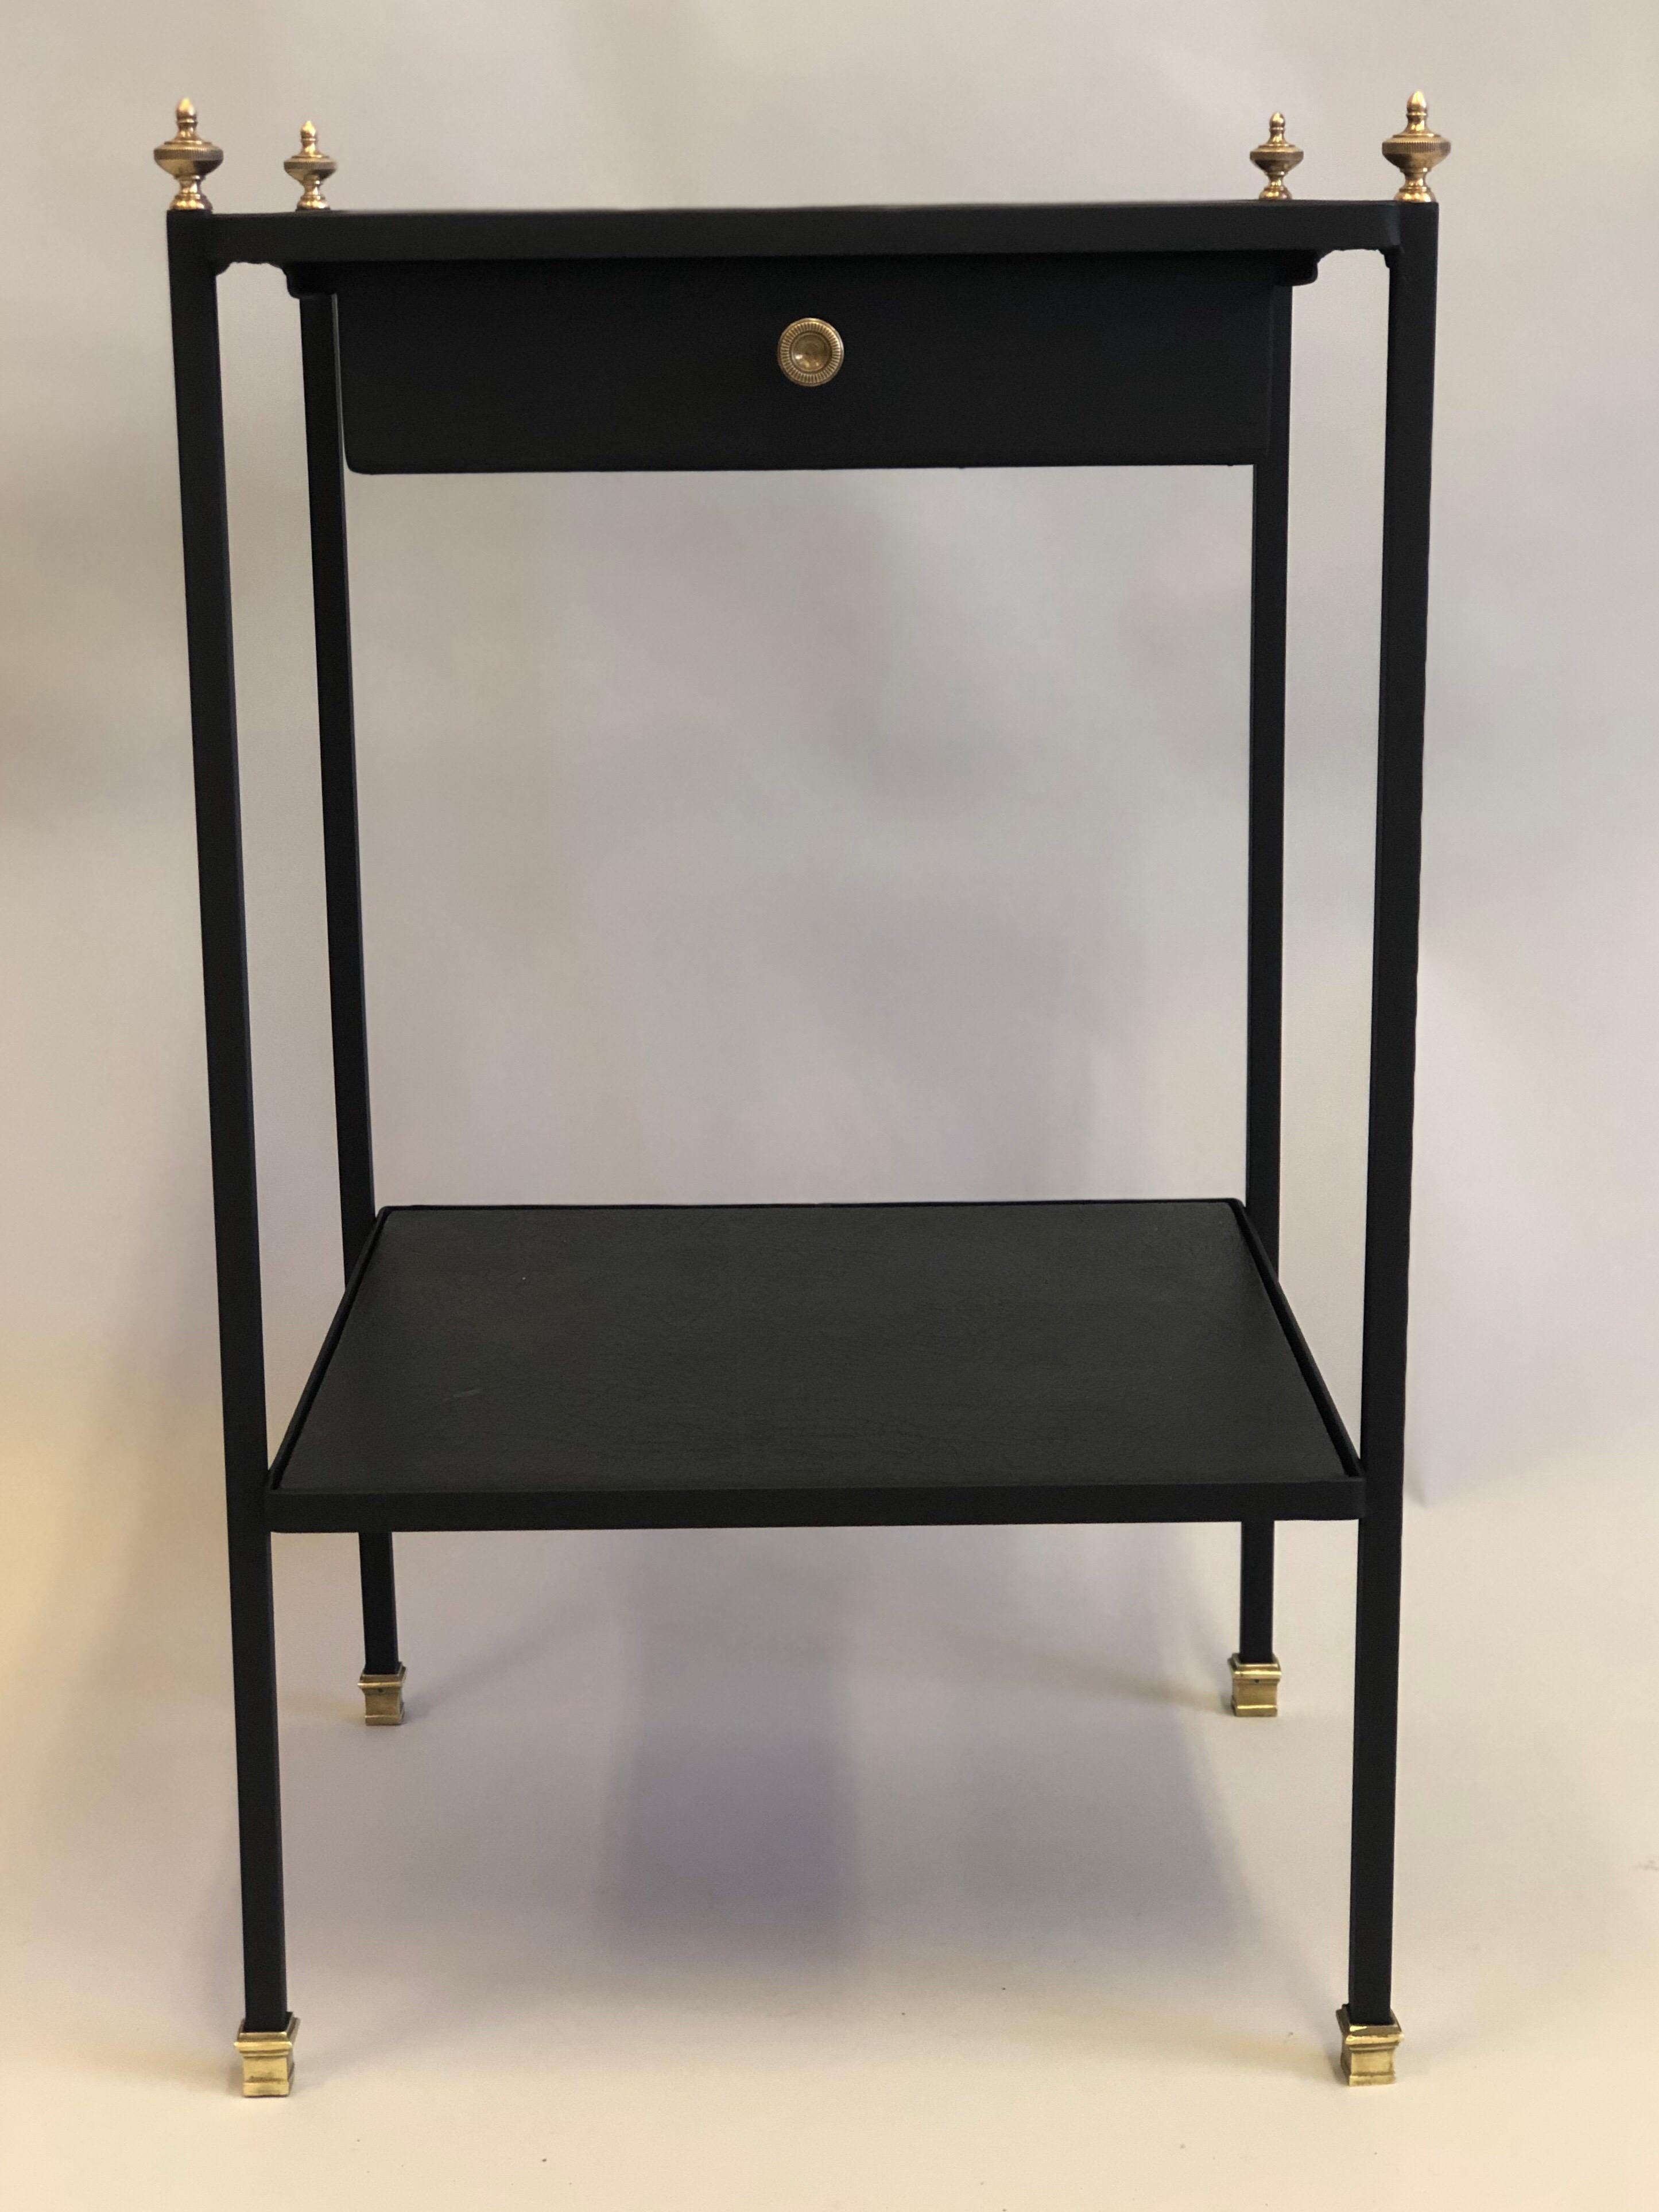 Elegant, Sober French Mid-Century Modern neoclassical black iron and faux black leather side or end table / nightstand by Jacques Adnet with exquisite lines and profile. 

The drawer is suspended beneath the top level and is delicately spaced